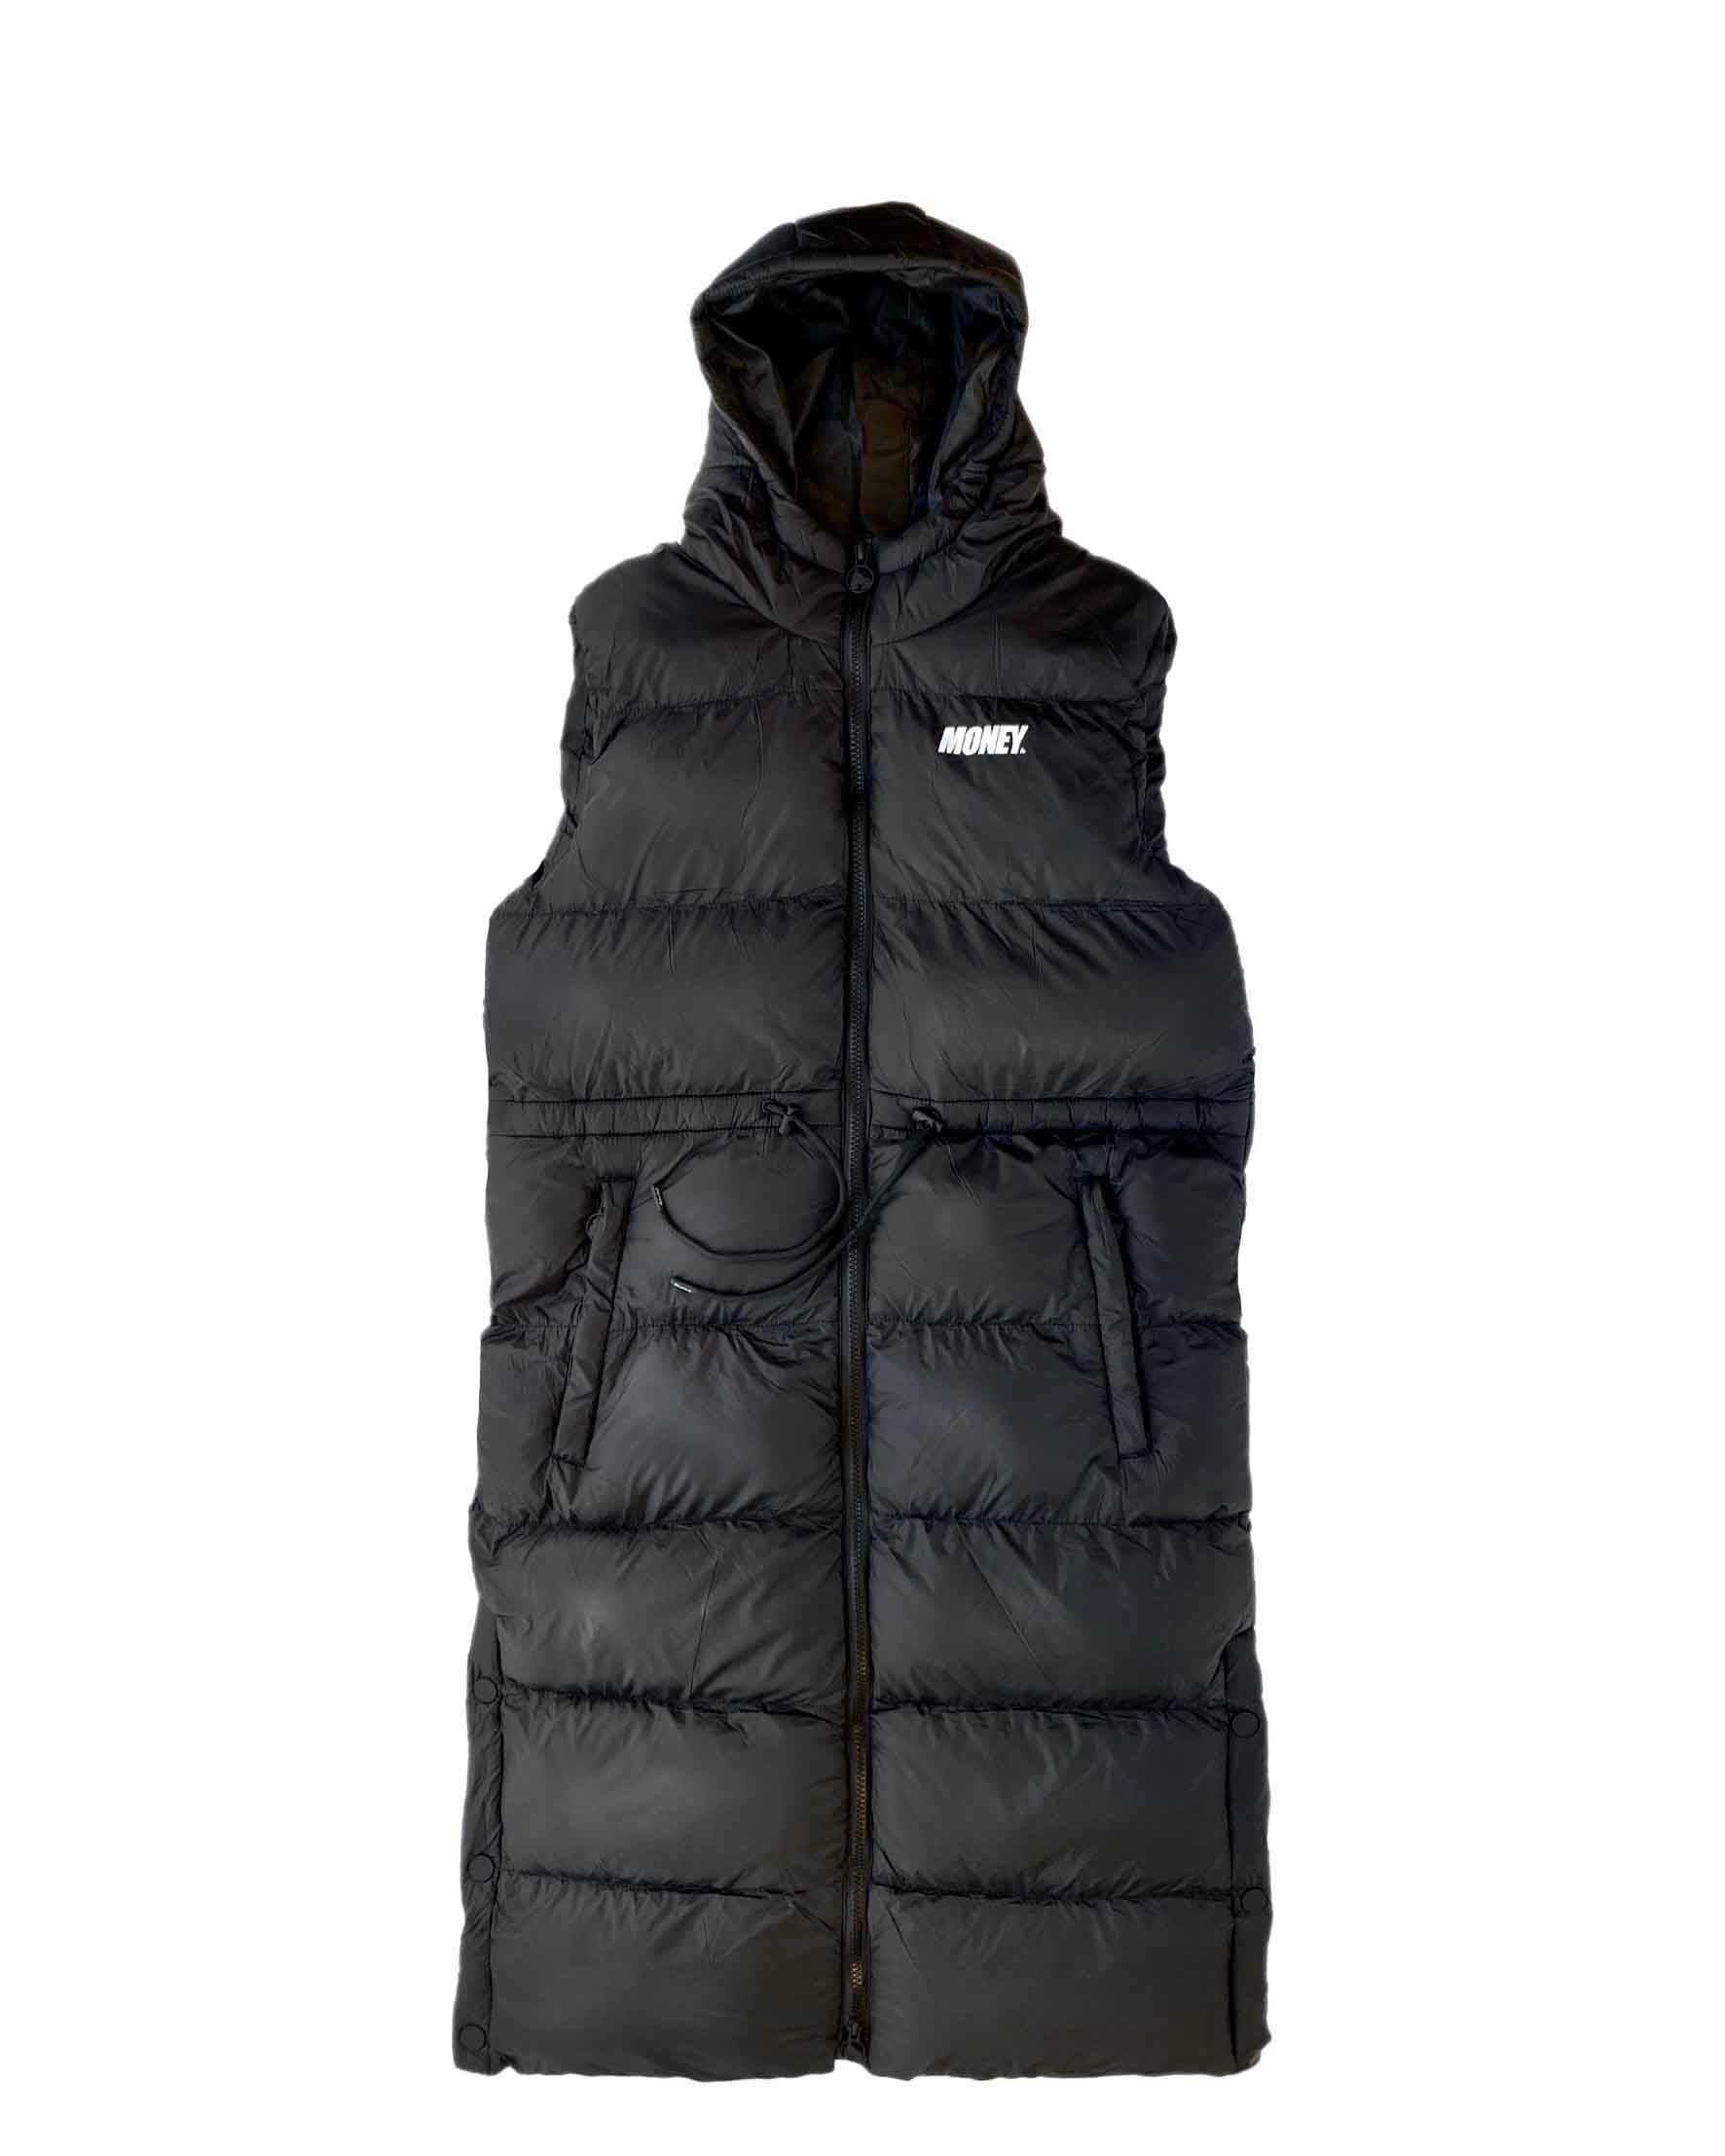 Ladies Hooded Gilet Cheapest | lazzaralawfirm.com